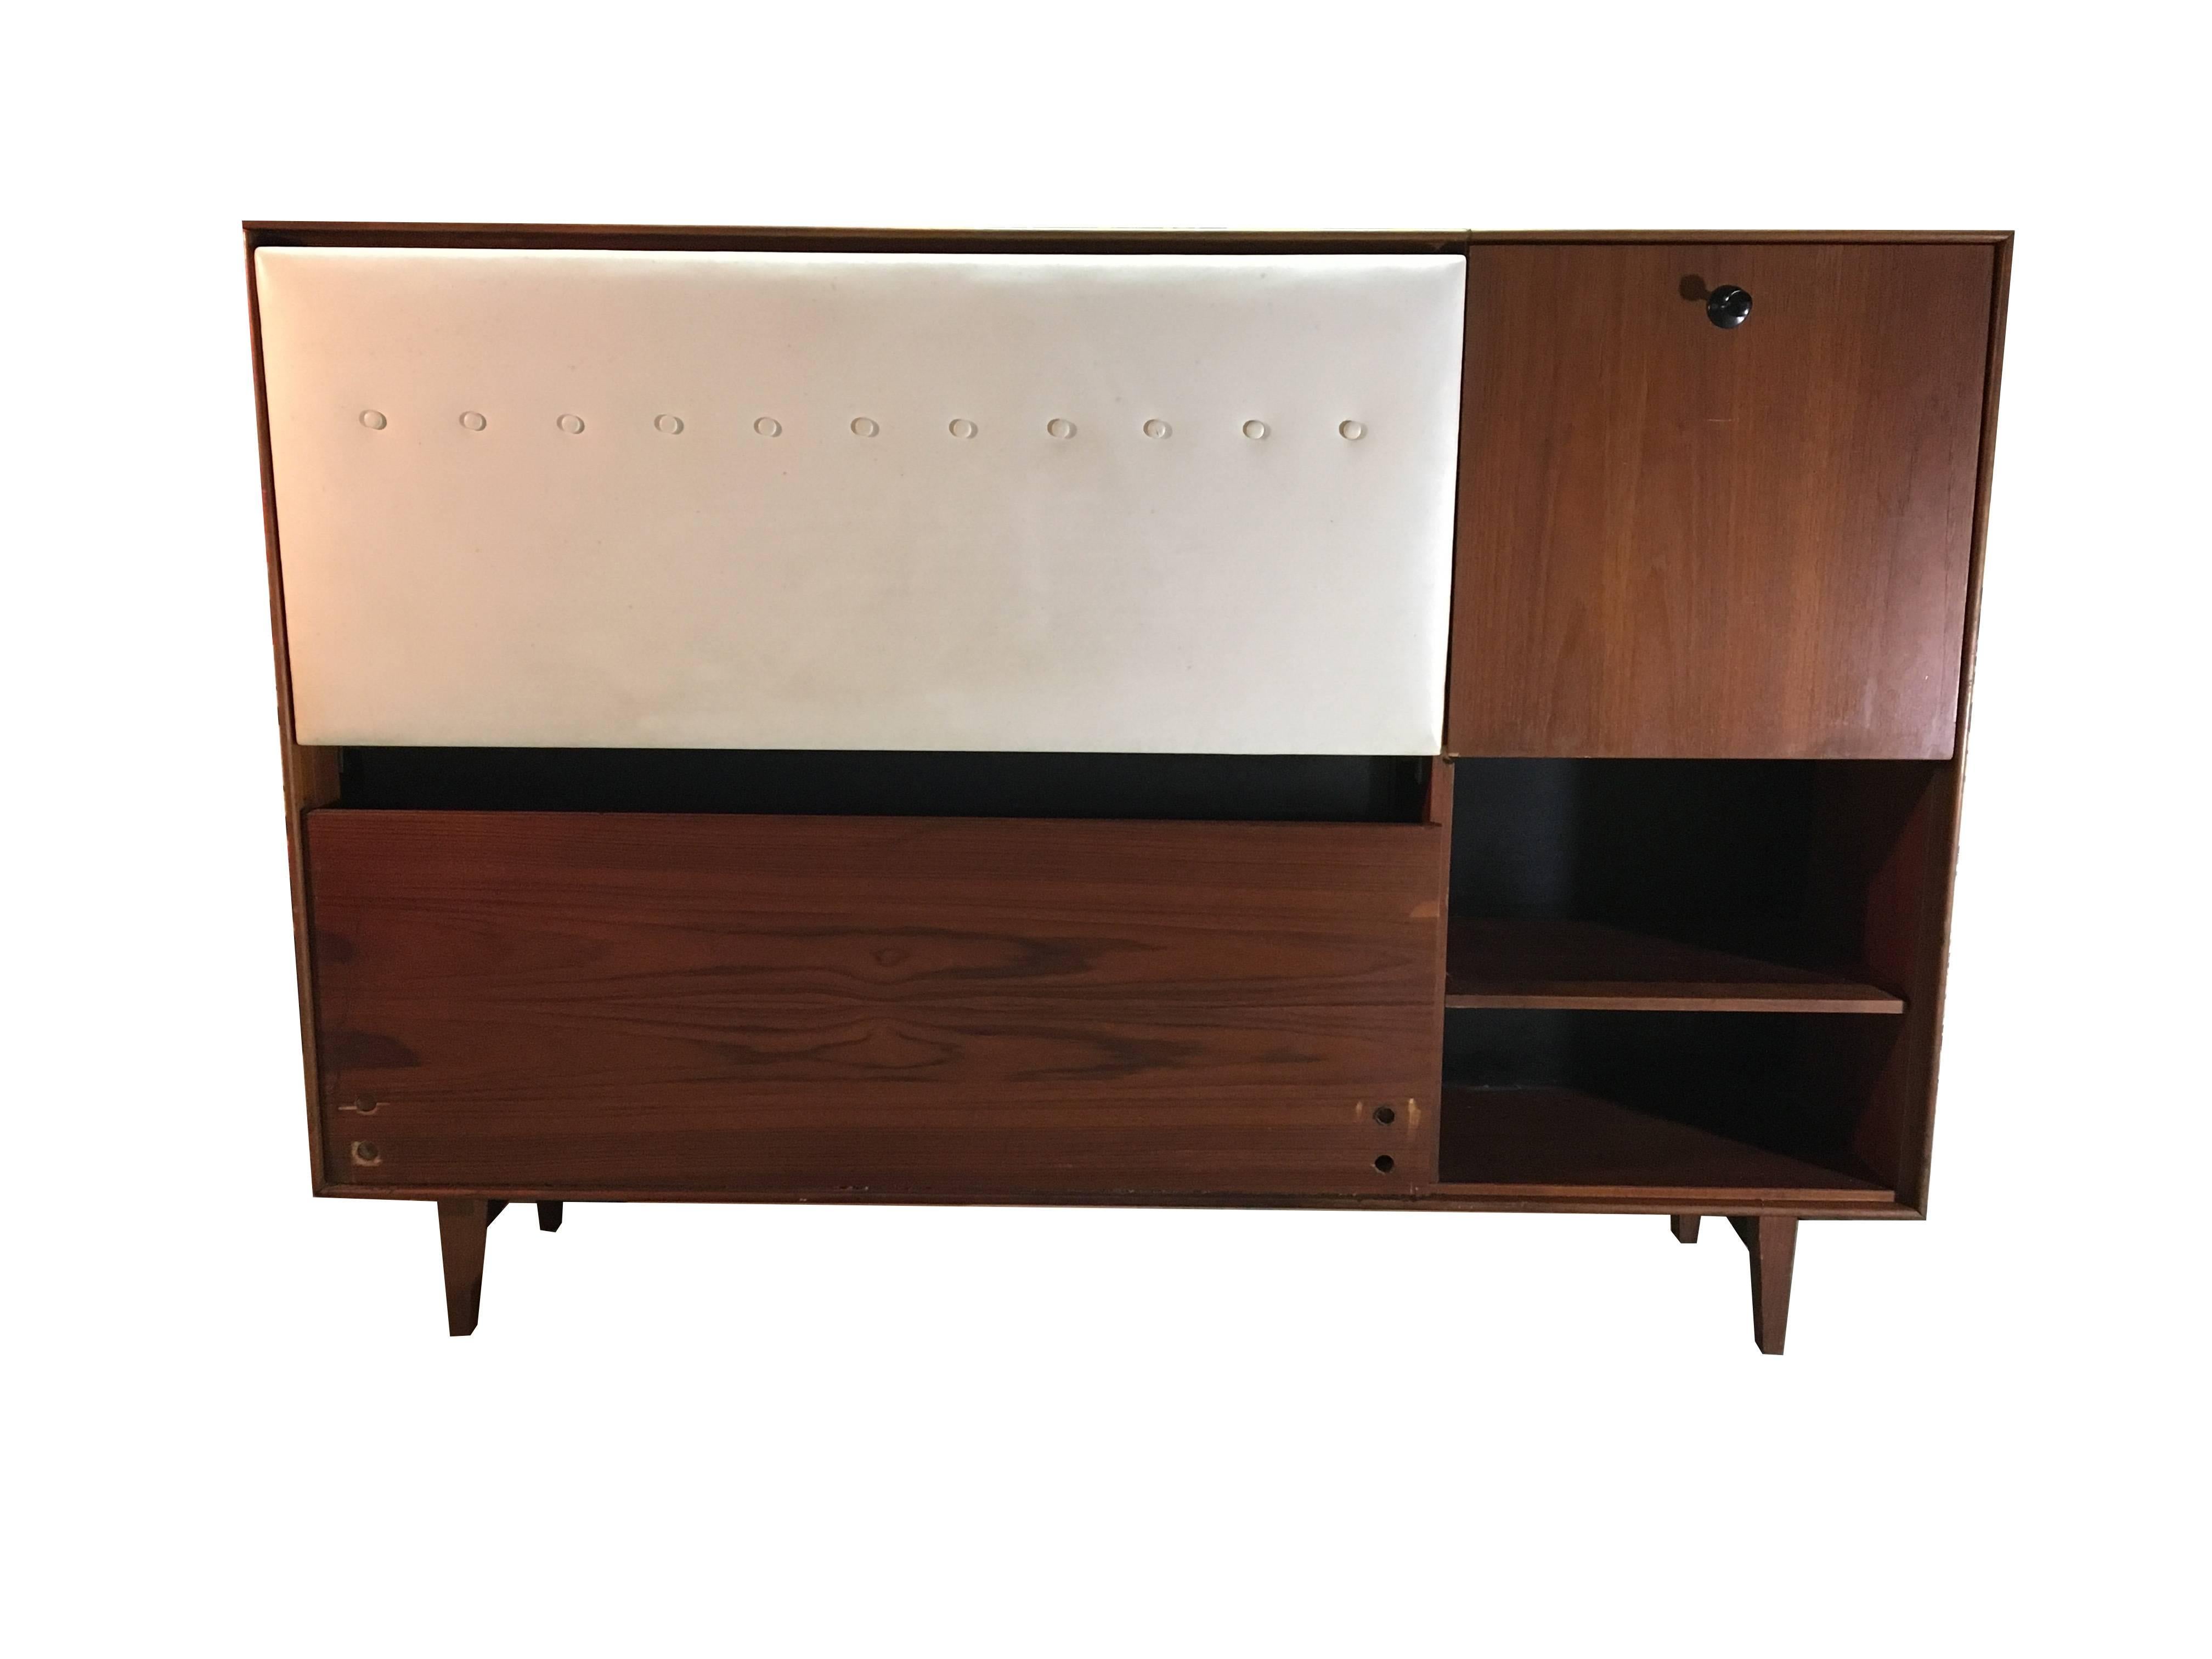 Beautiful single headboard designed by George Nelson for Herman Miller. Rare 